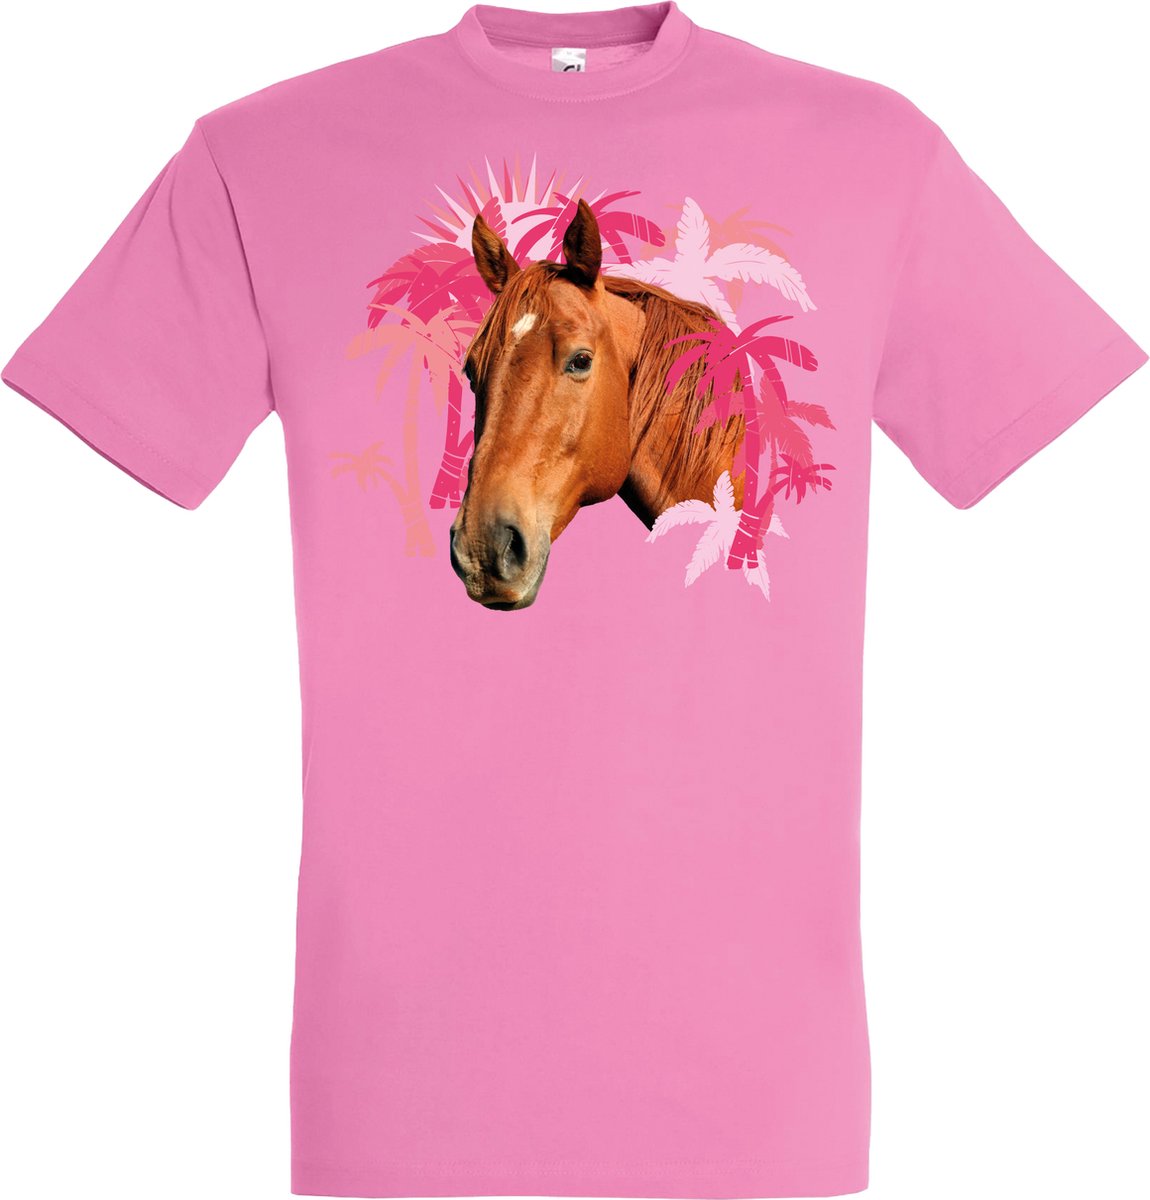 Plenty Gifts T-shirt Horses Orchid Pink S